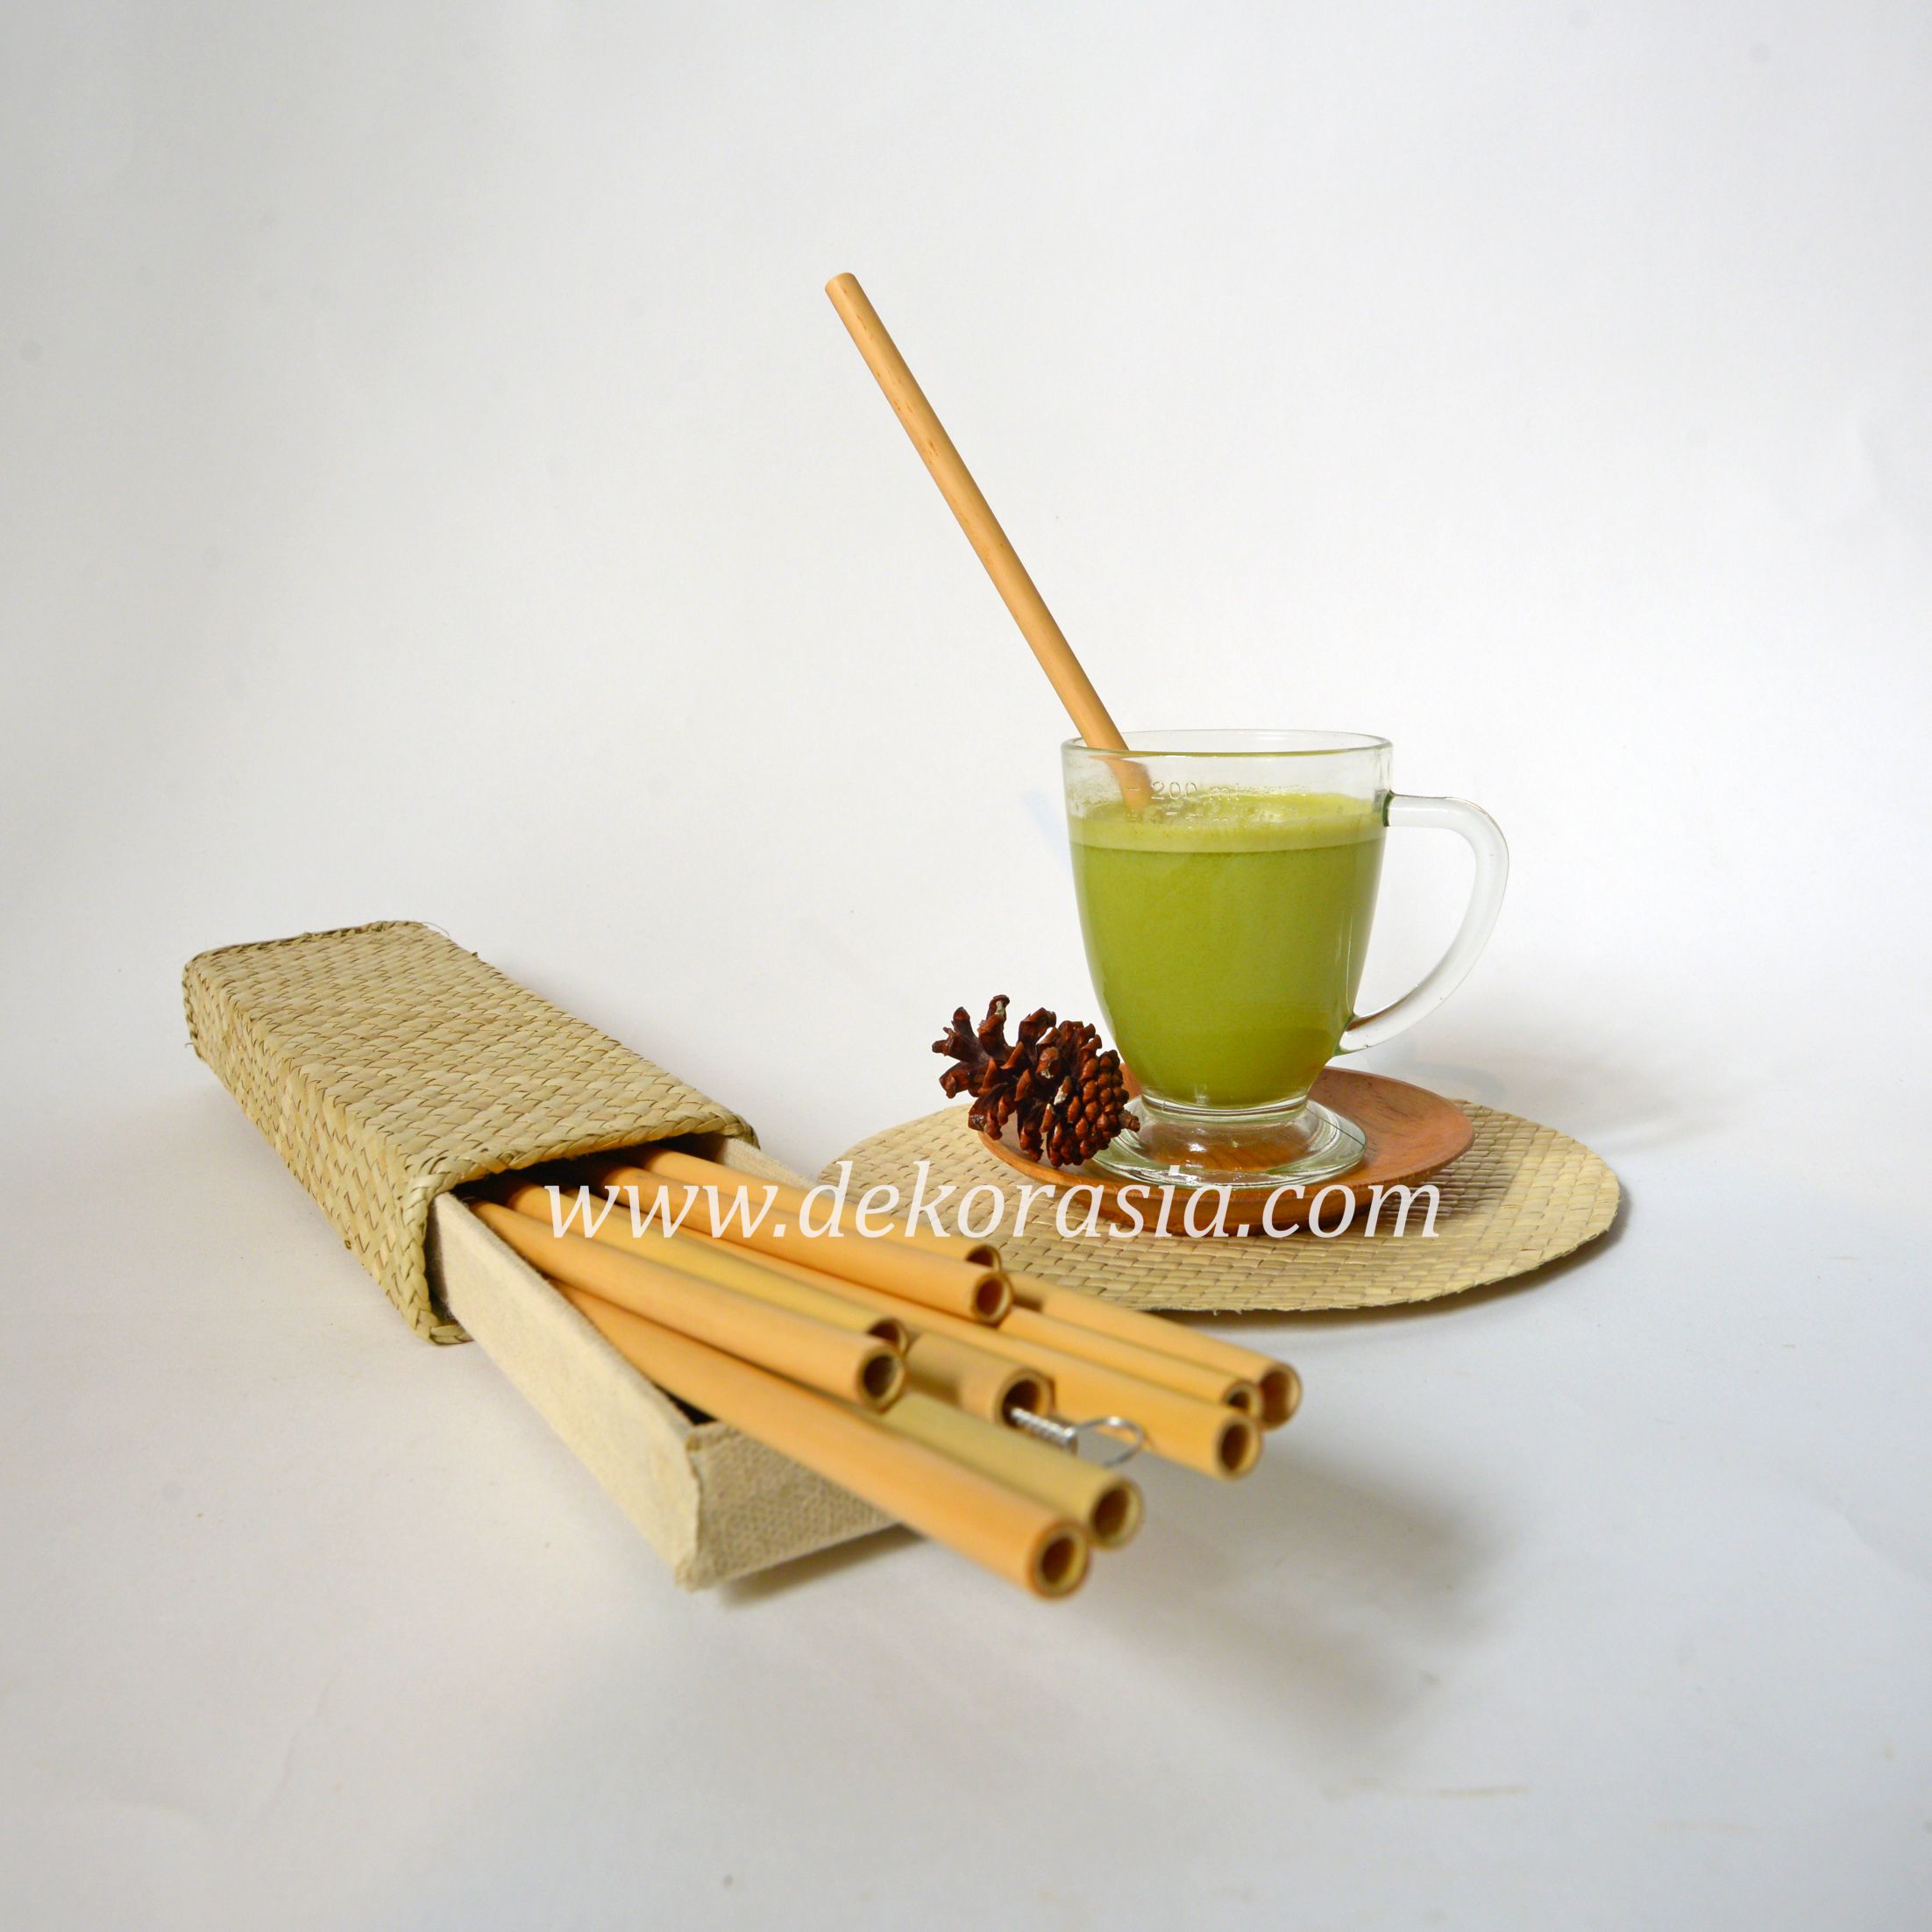 Bamboo Straw Set with Square Pencil Case